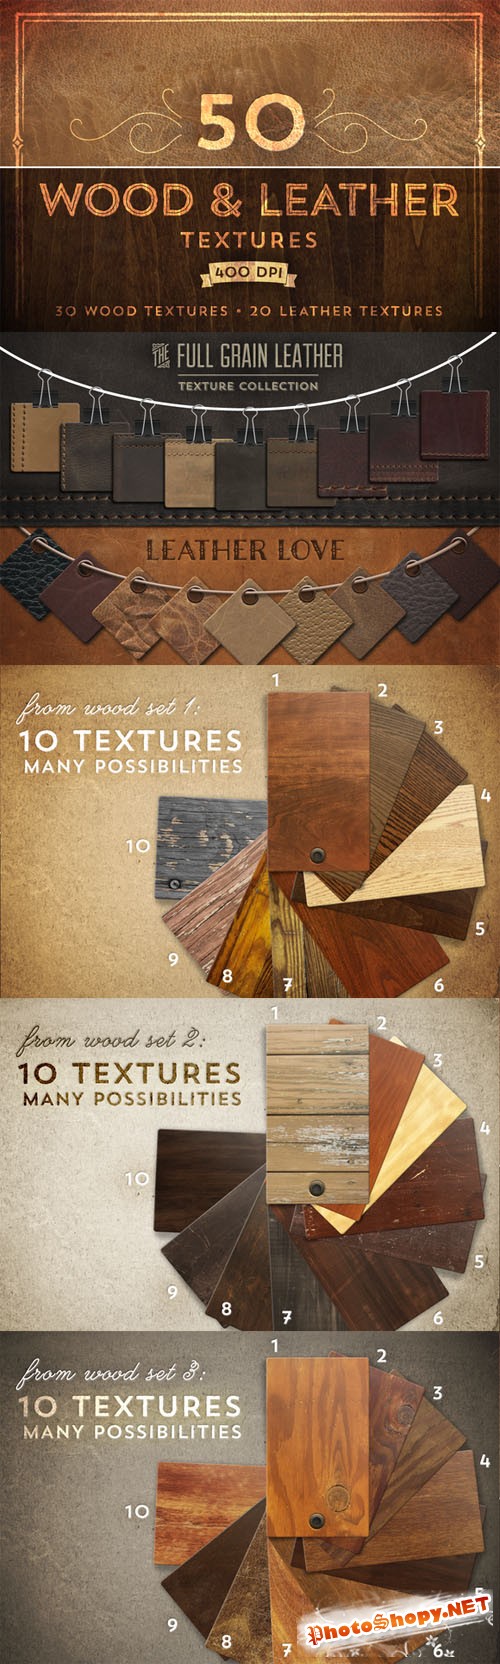 50 Wood & Leather Textures - CM 22188